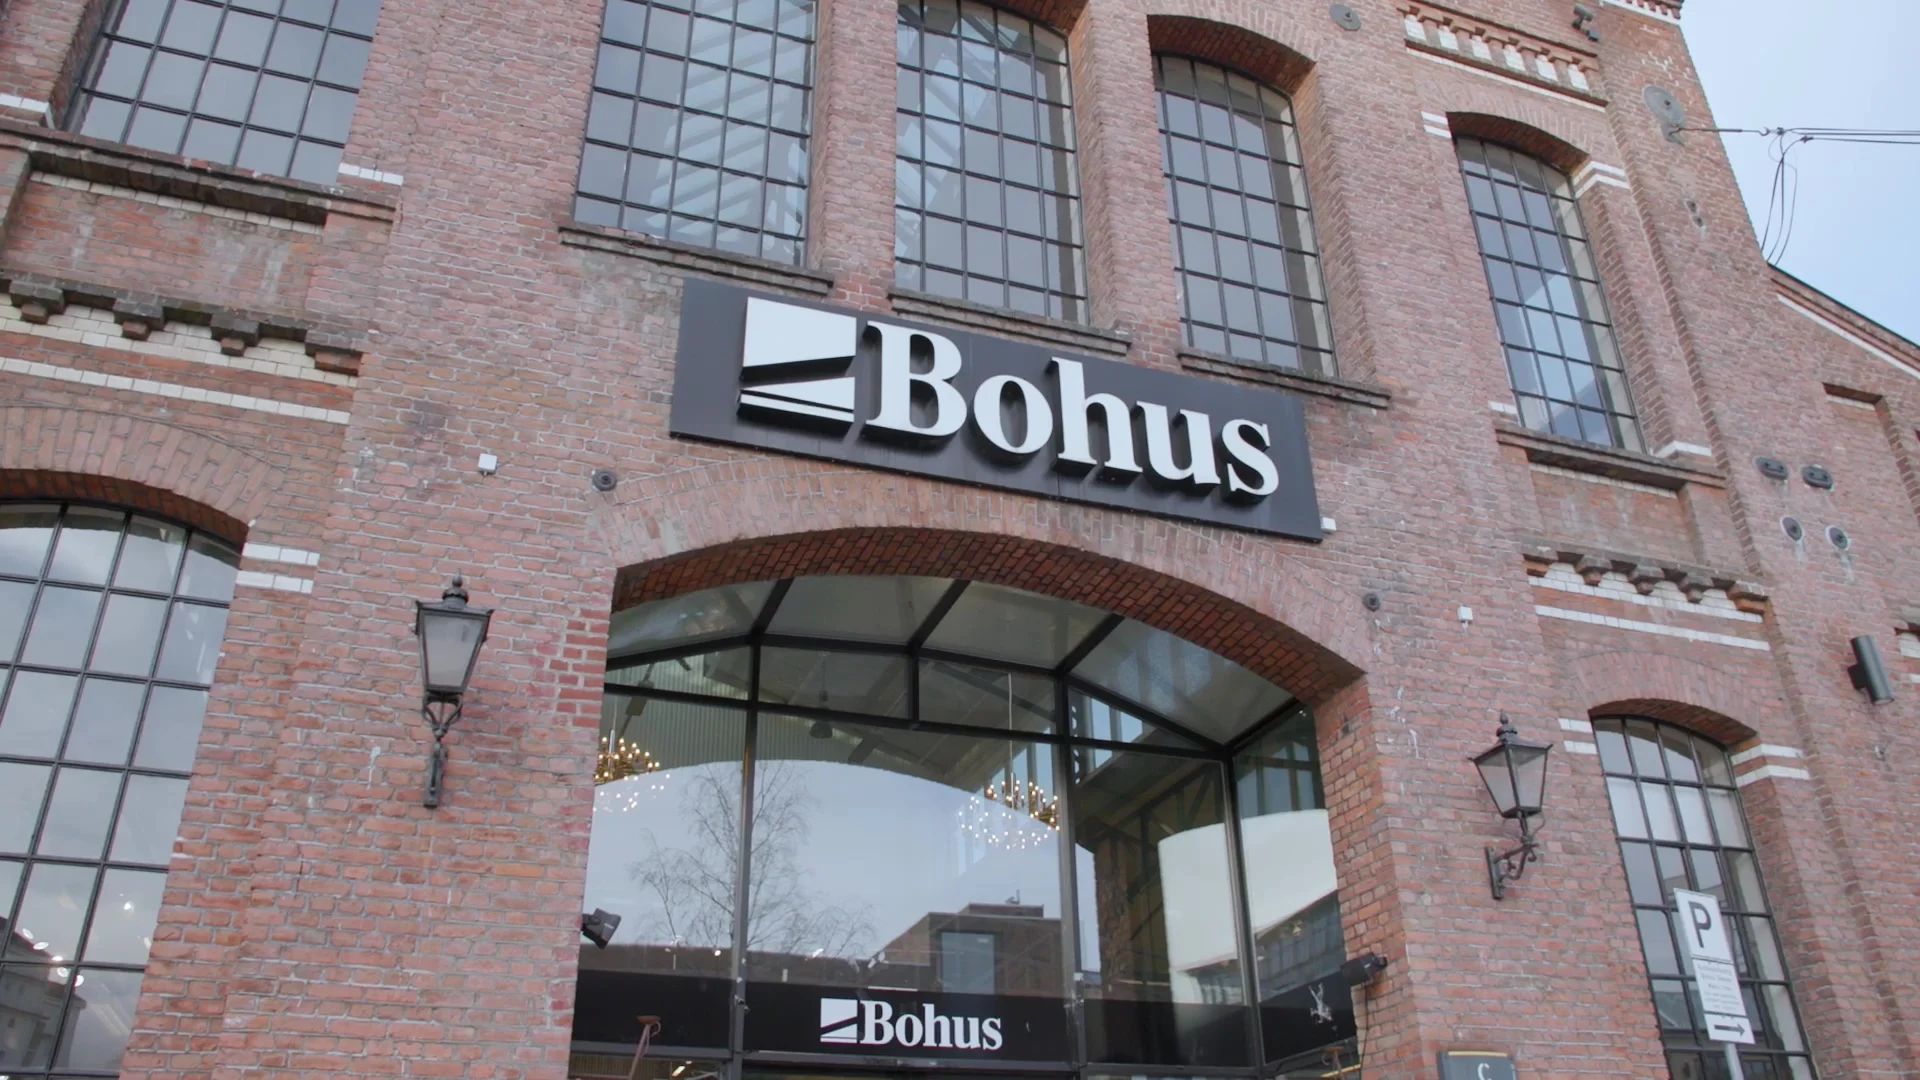 Bohus, Norway's leading furniture chain, has successfully implemented a scalable POS solution in partnership with Pearl.